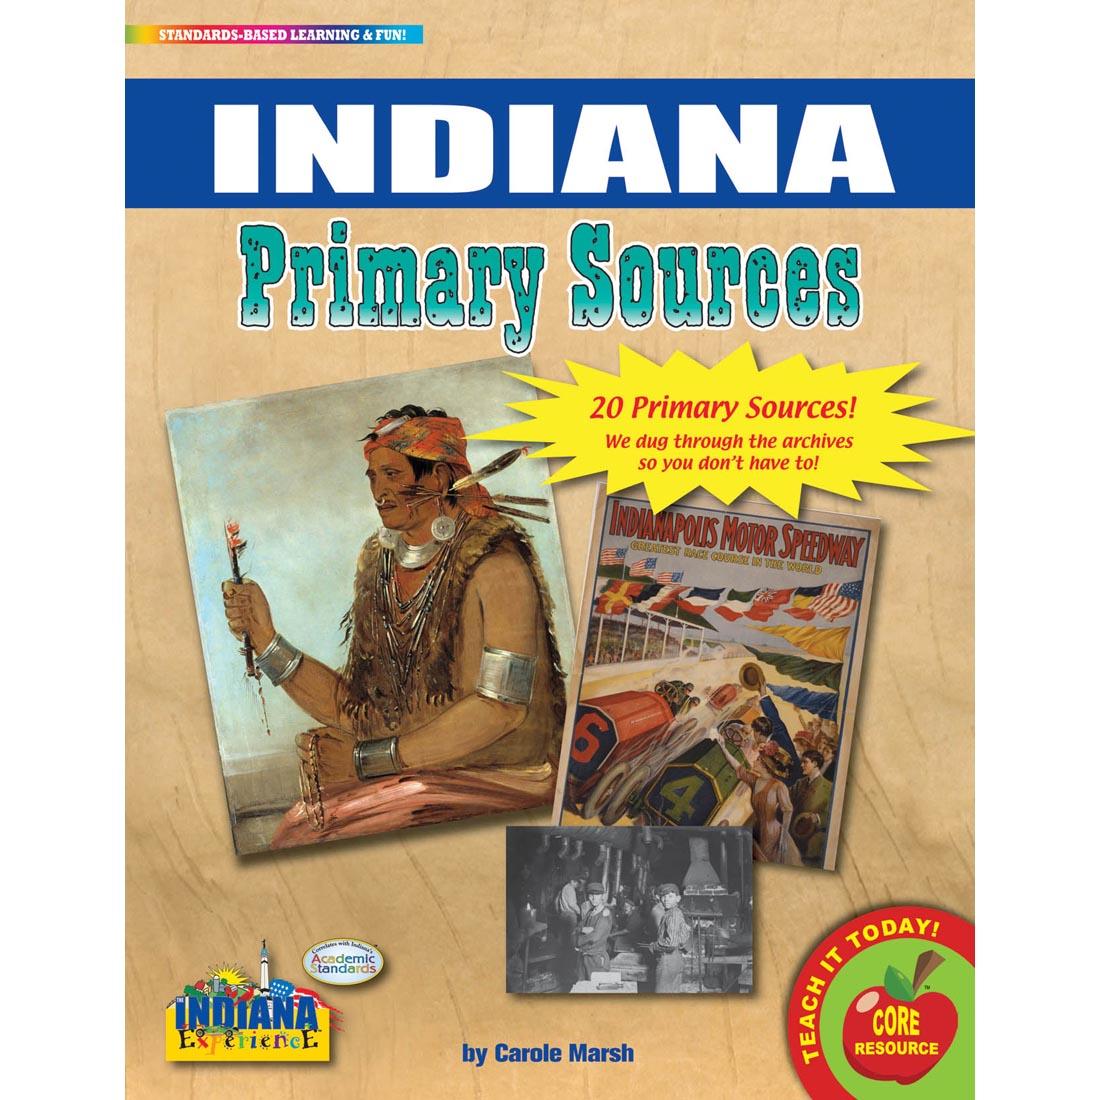 Indiana Primary Sources